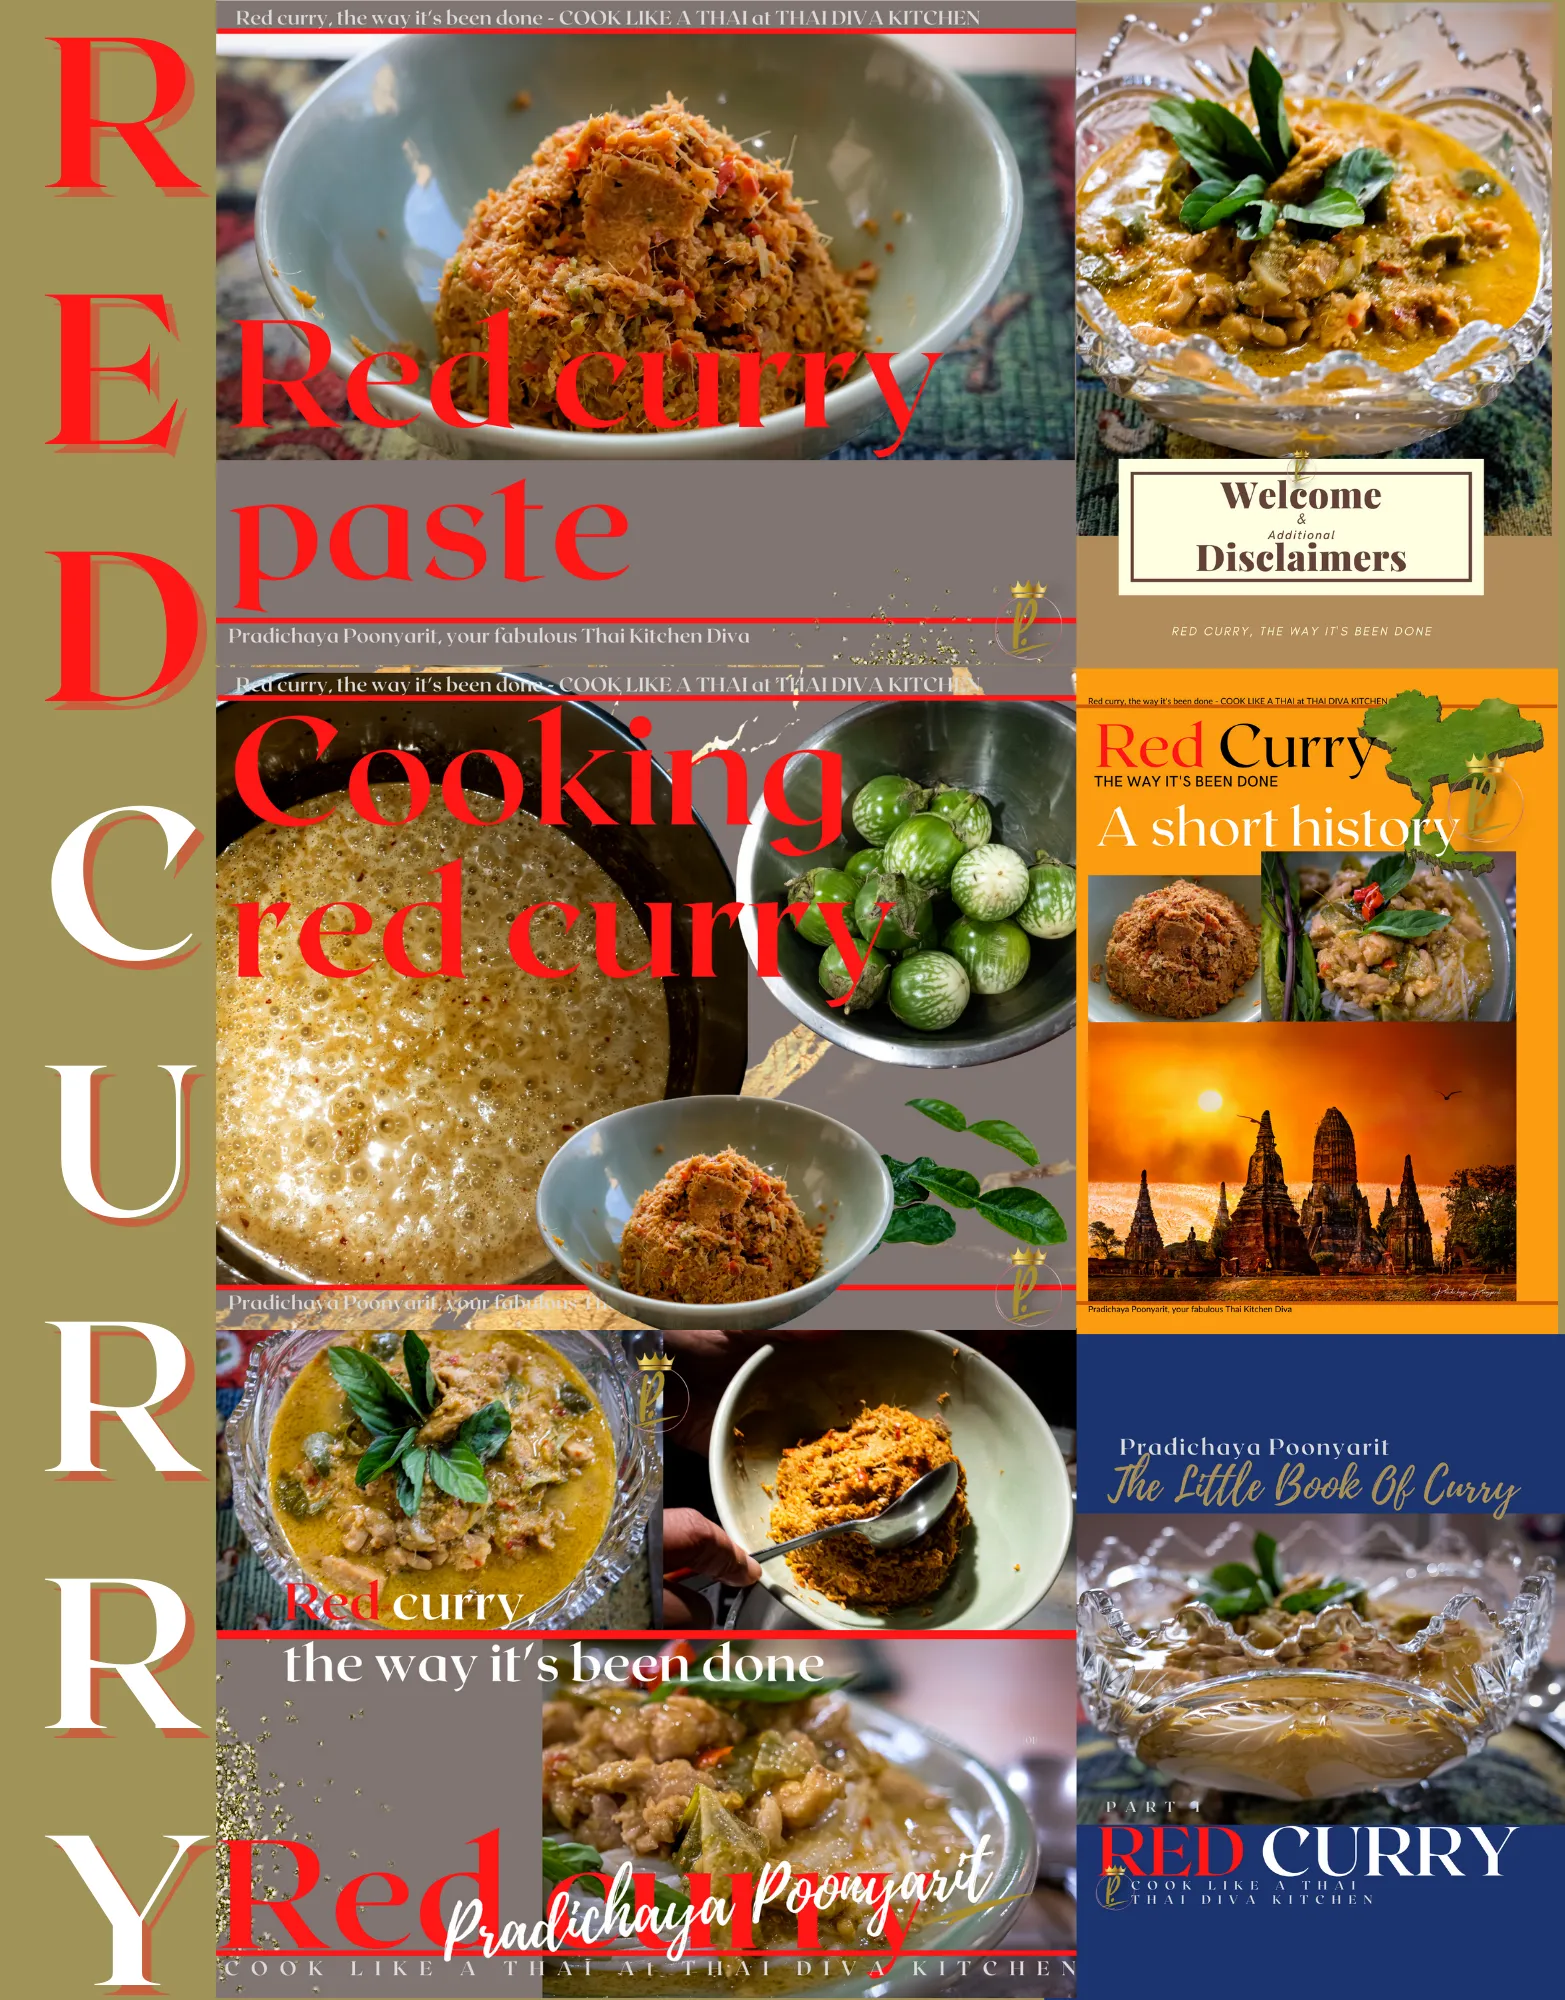 Cook Thai curry the true Thai way, do it right today with 